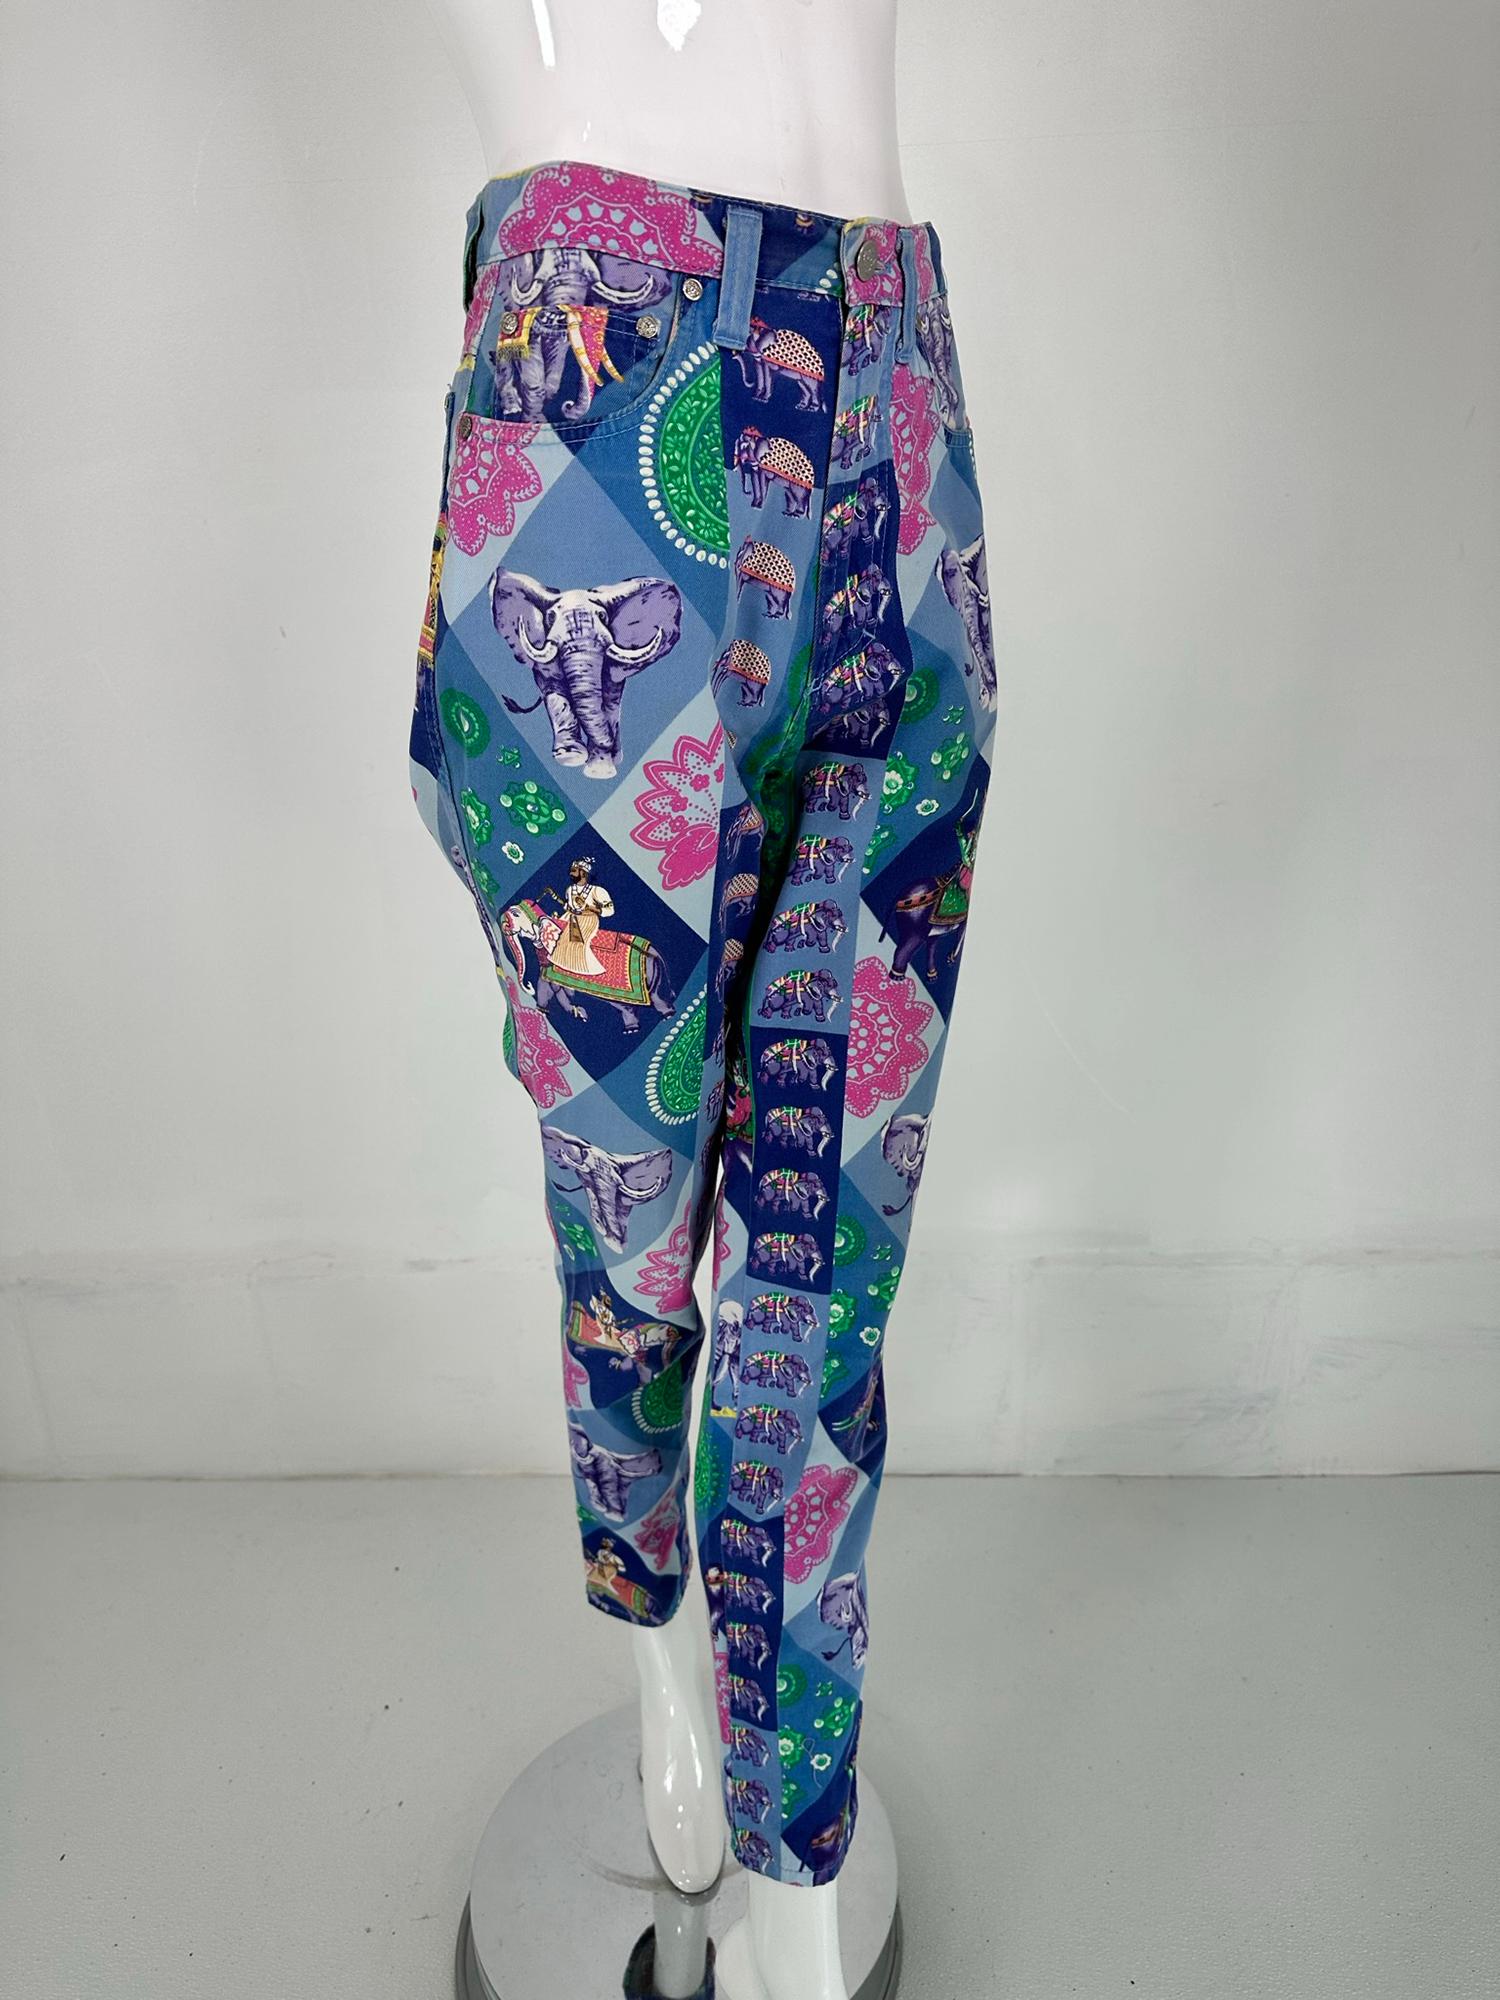 Versace Jeans Couture blue India elephant print, high waist fitted jeans from the 1990s. Brightly printed with elephants, jewels &  goddesses. Done in shades of light blue, dark blue, marine blue with green, yellow & pink. High waist with a fly